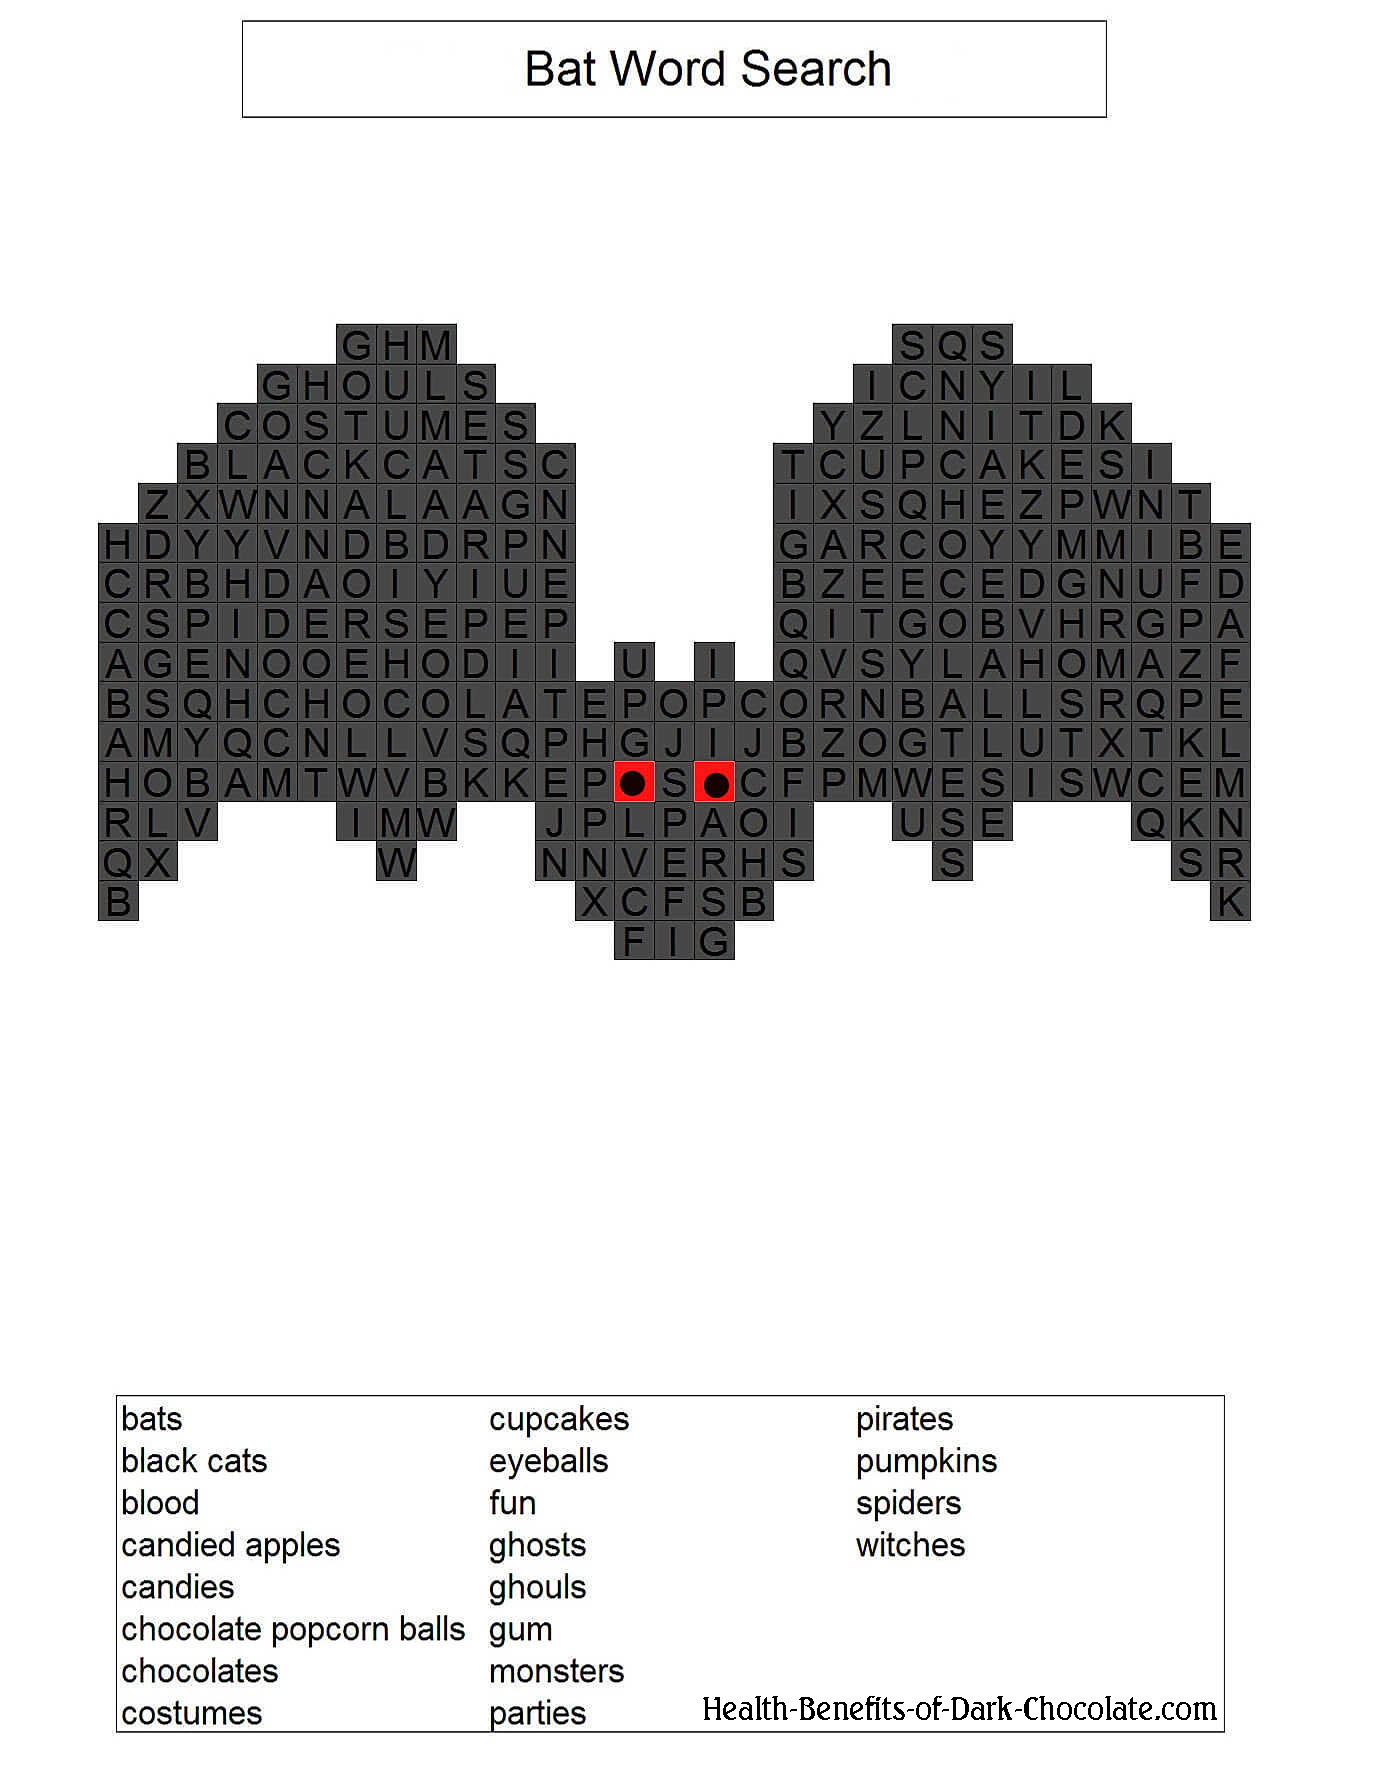 Bat shaped word search.